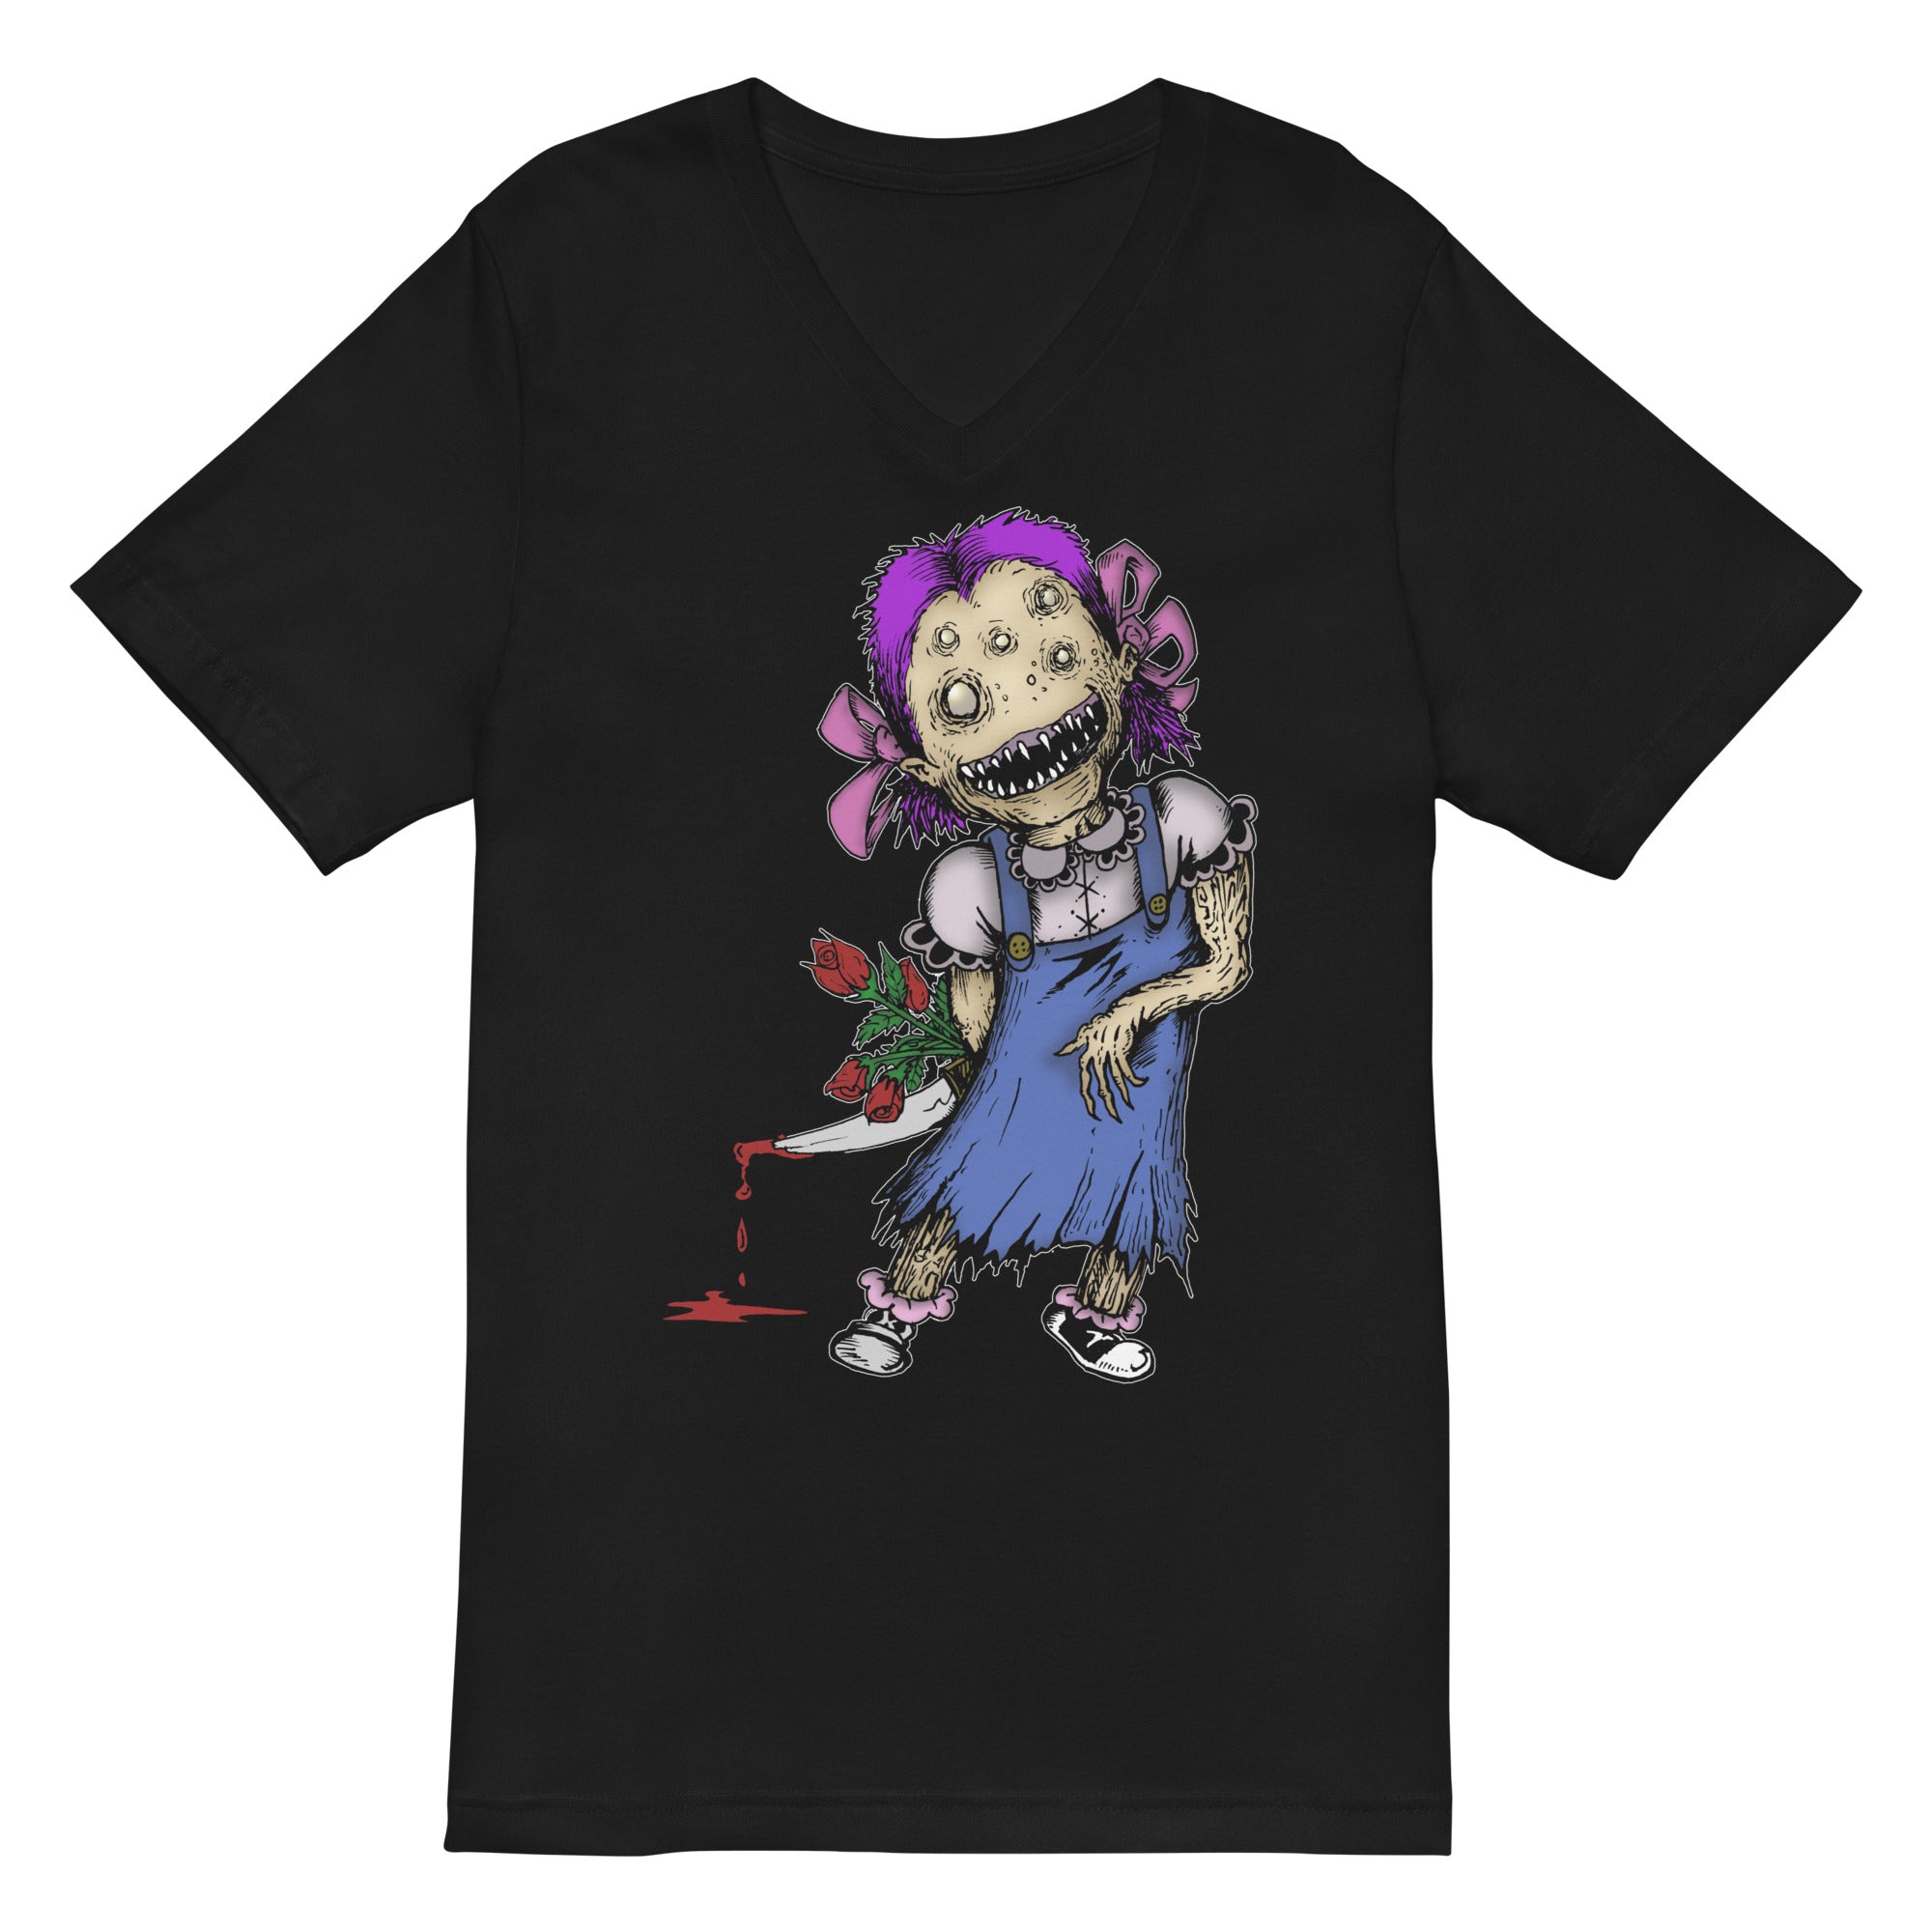 Wicked Little Girl with Bloody Knife Horror Style Women’s Short Sleeve V-Neck T-Shirt - Edge of Life Designs